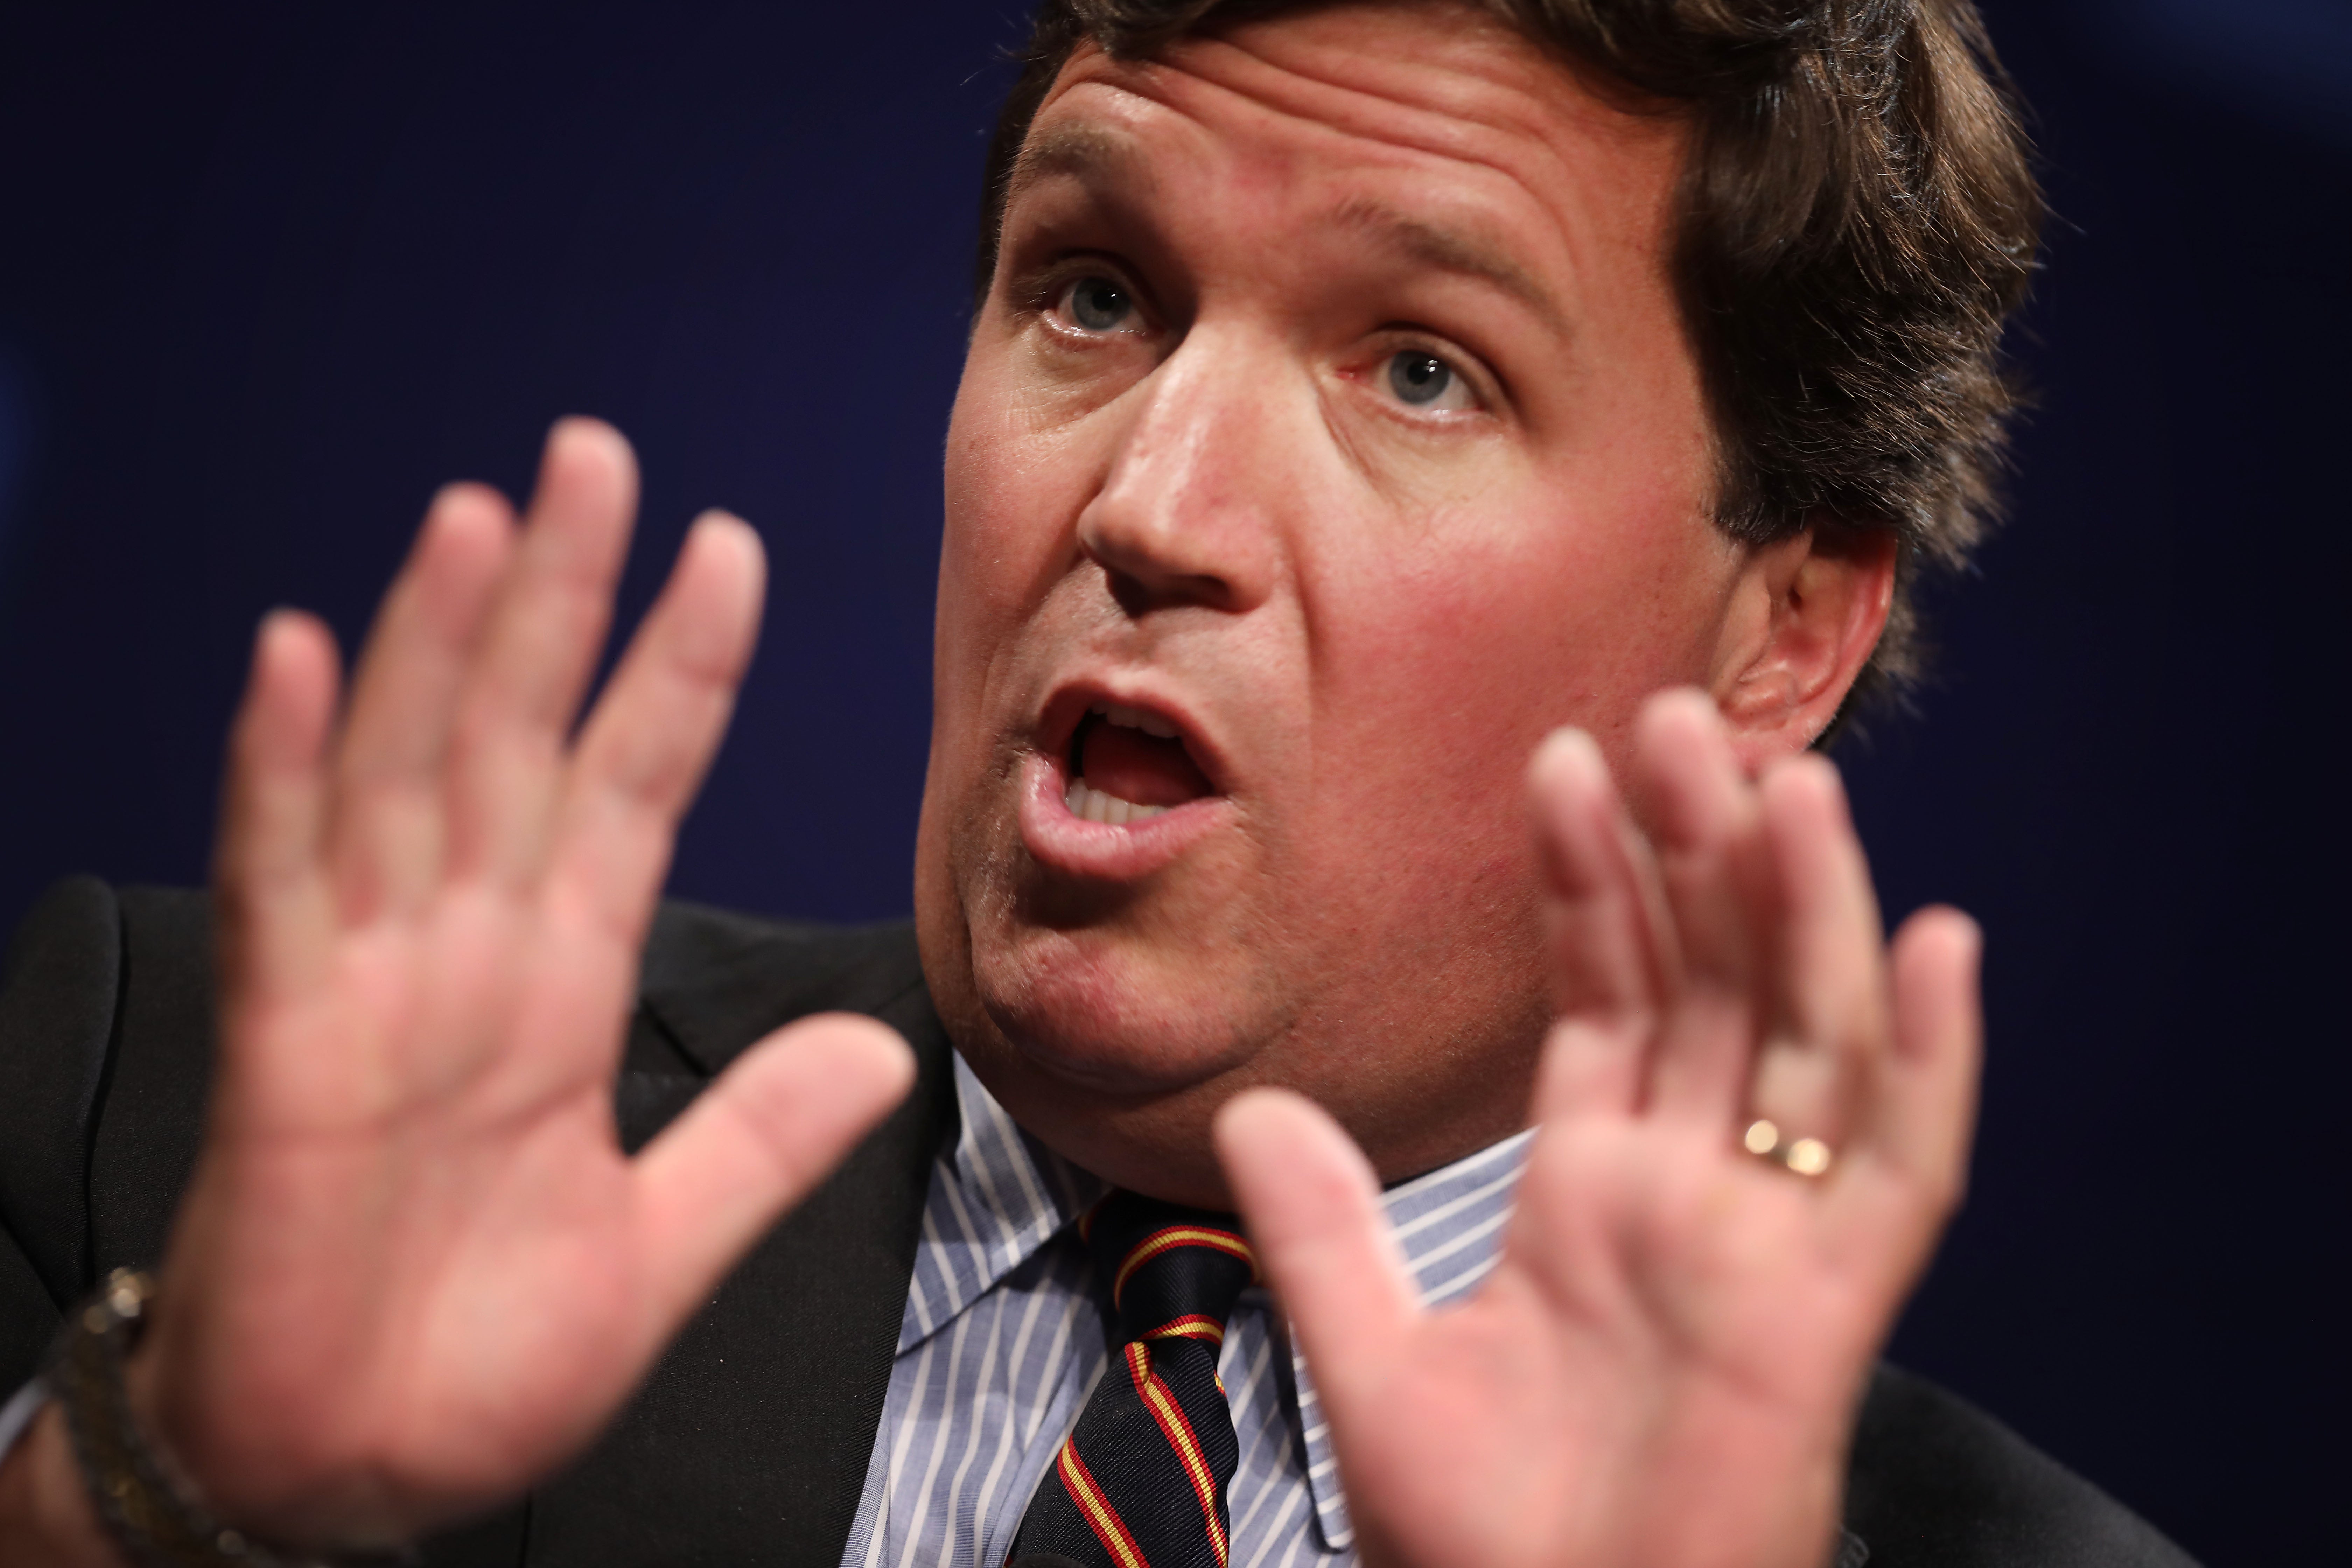 Tucker Carlson recently raged against Patagonia on his Fox News show